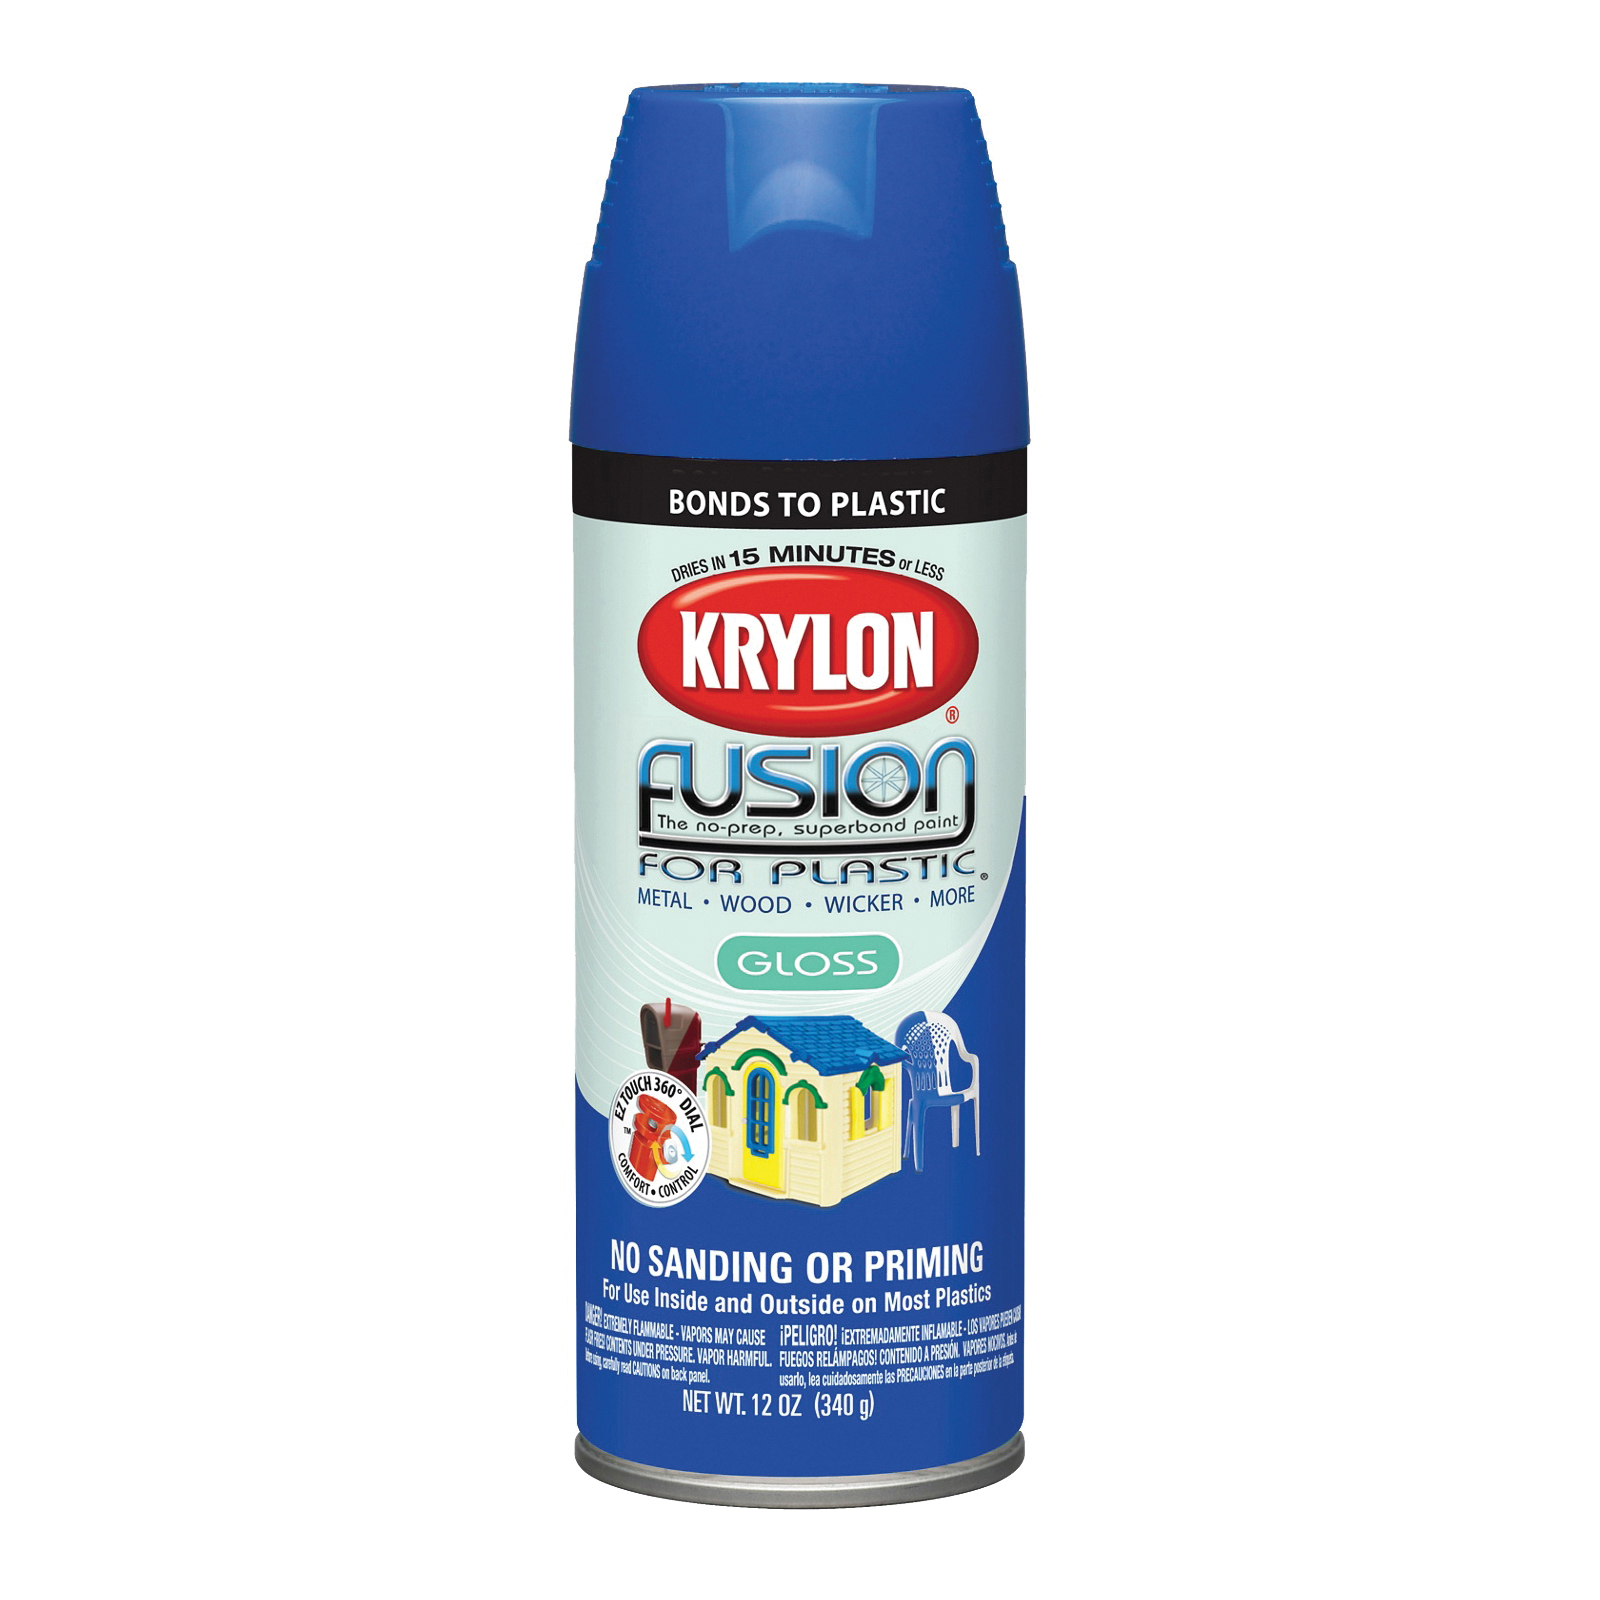 Krylon Spray Paint Review  How to Apply a Top Coat on Acrylic